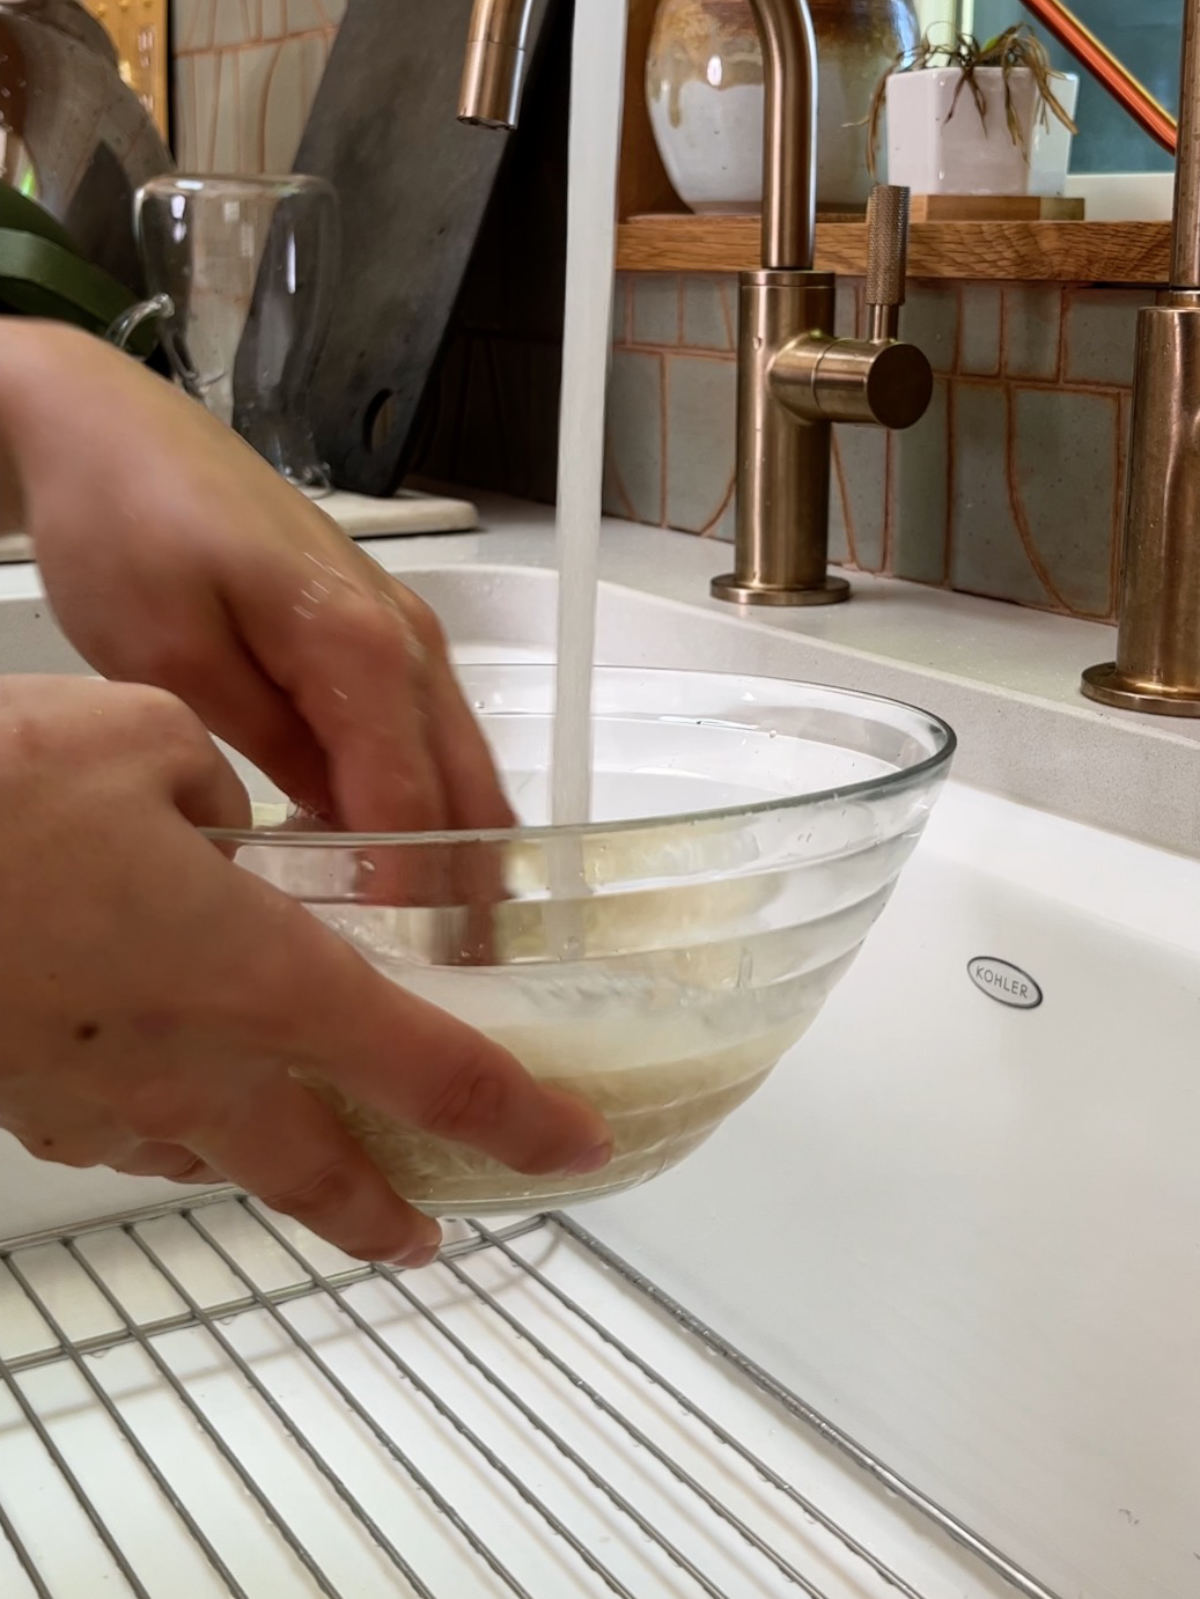 Two hands washing rice in a glass bowl in a white sink.